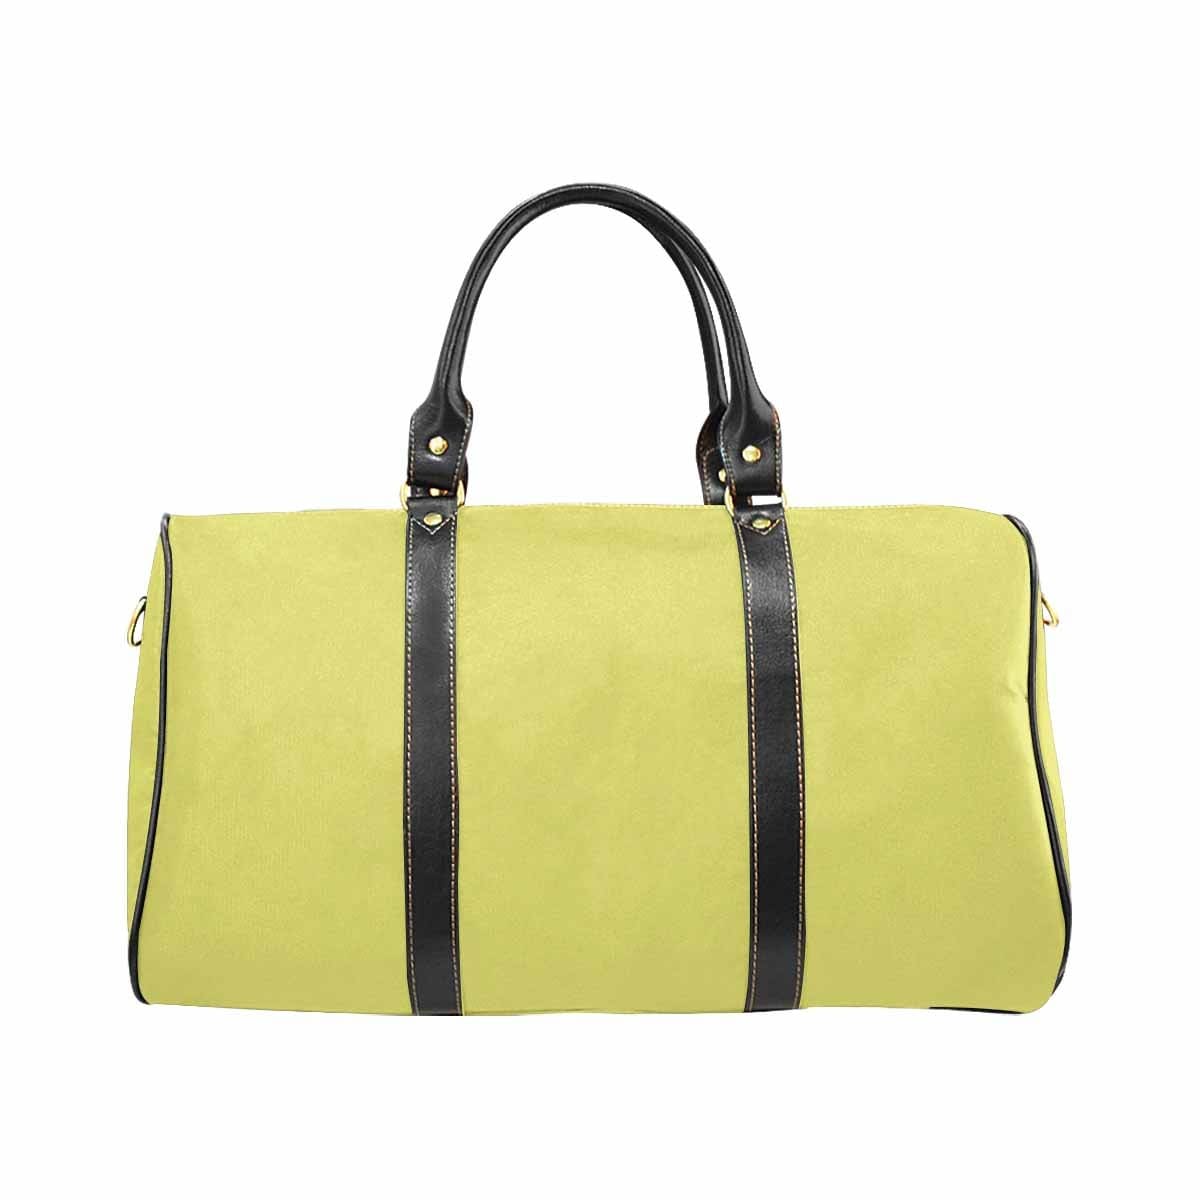 Travel Bag Leather Carry On Large Luggage Bag Honeysuckle Yellow - Bags | Travel